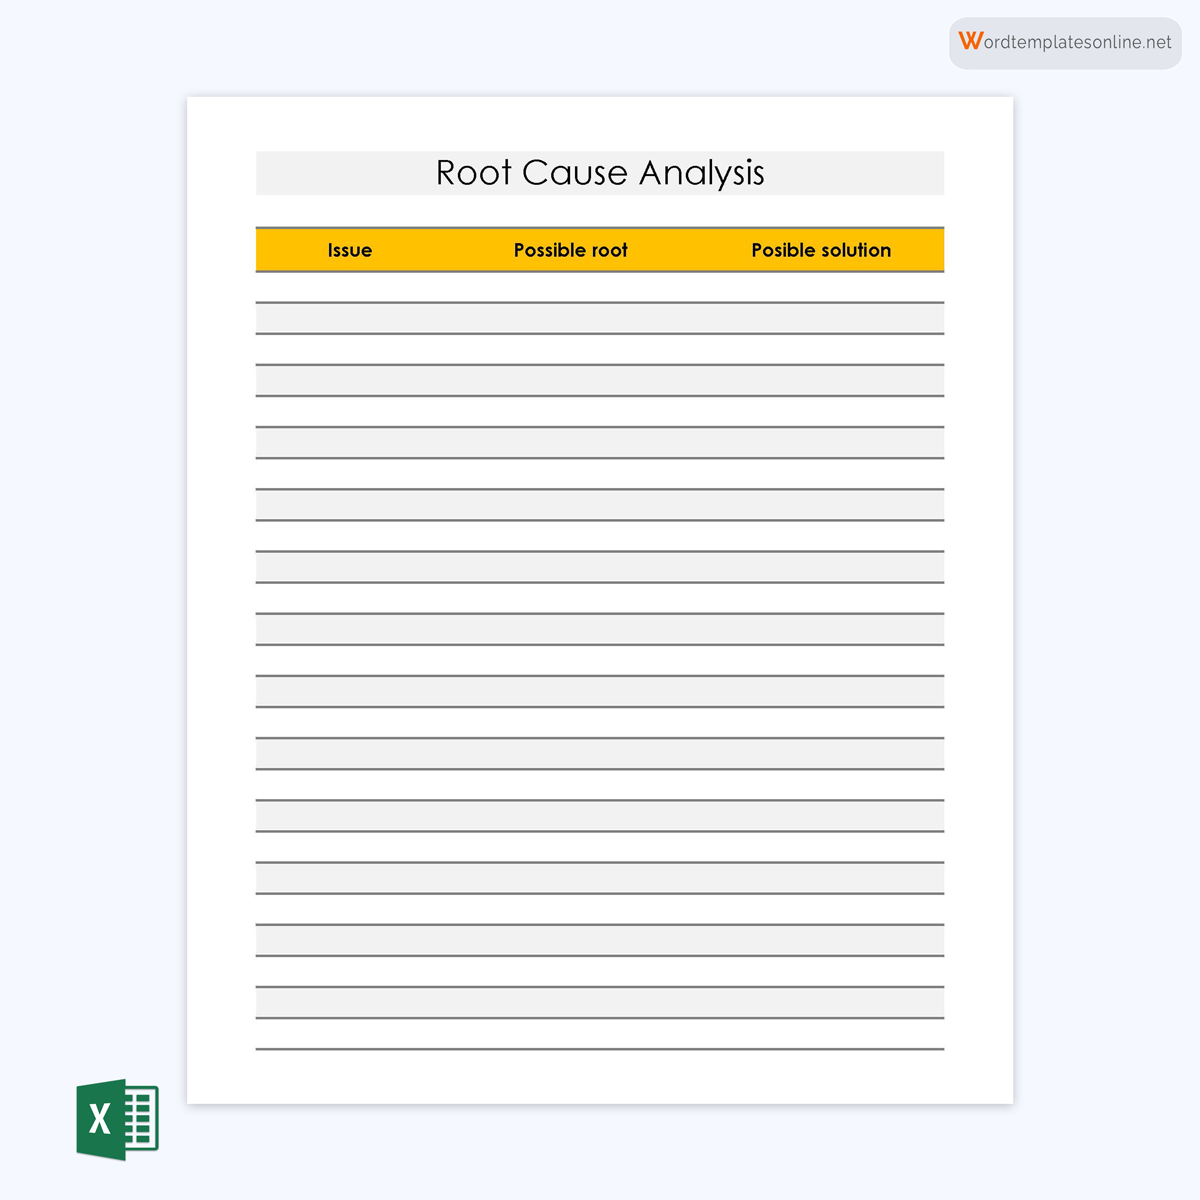 Simplified root cause analysis template in Excel format 15